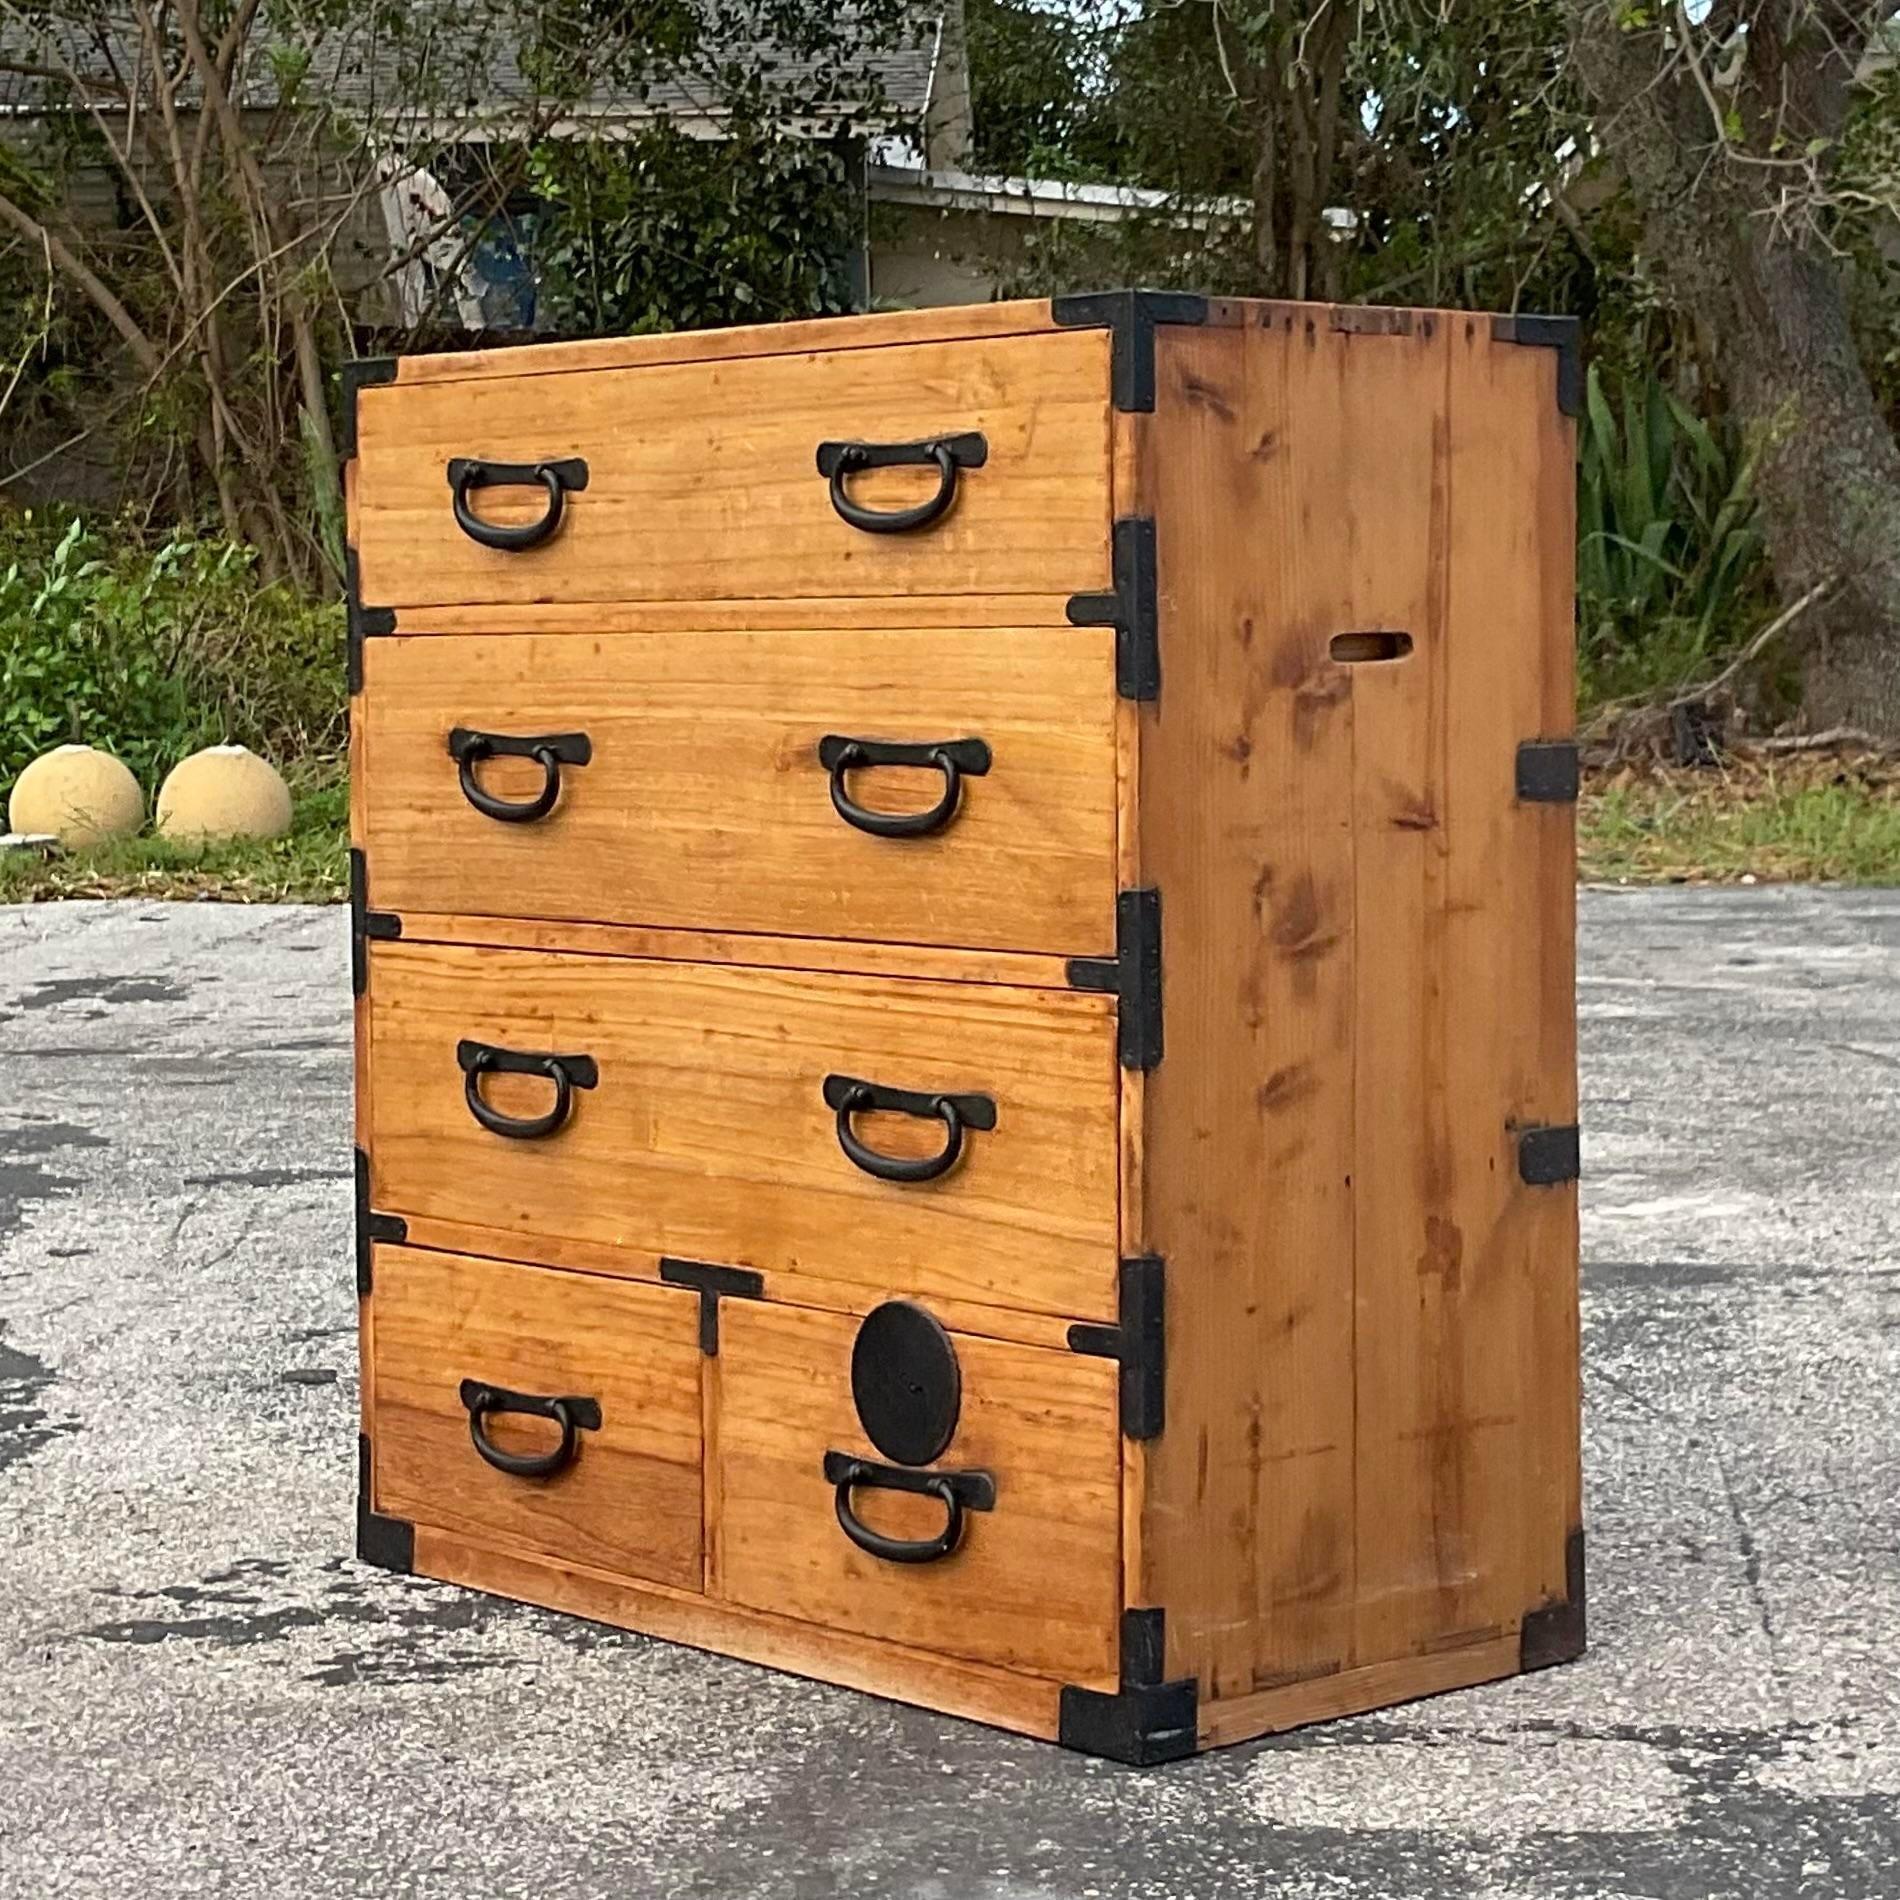 A fantastic vintage Asian chest of drawers. A chic natural wood cabinet with hammered metal hardware. Two open handles on each side. Acquired from a Palm Beach estate.